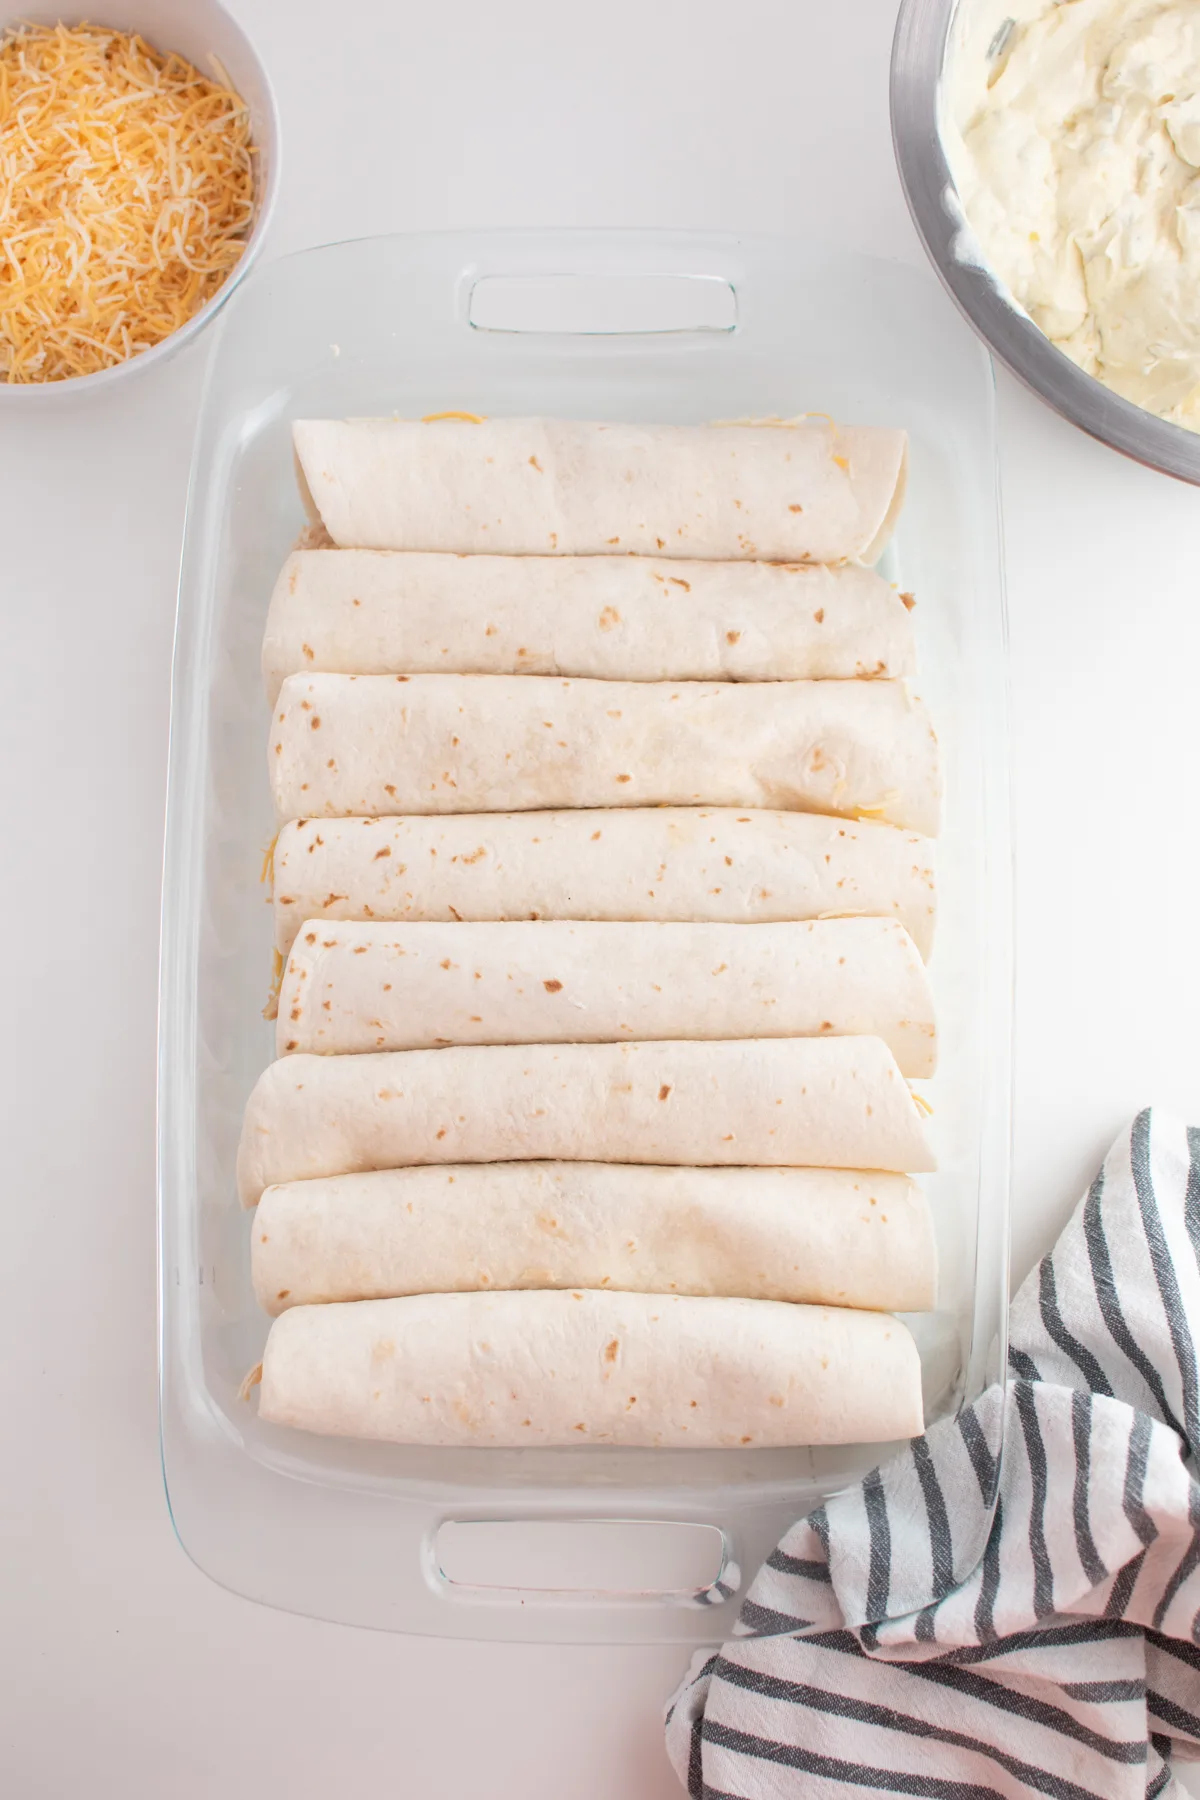 Several chicken enchiladas lined up in clear glass baking dish with no sauce.